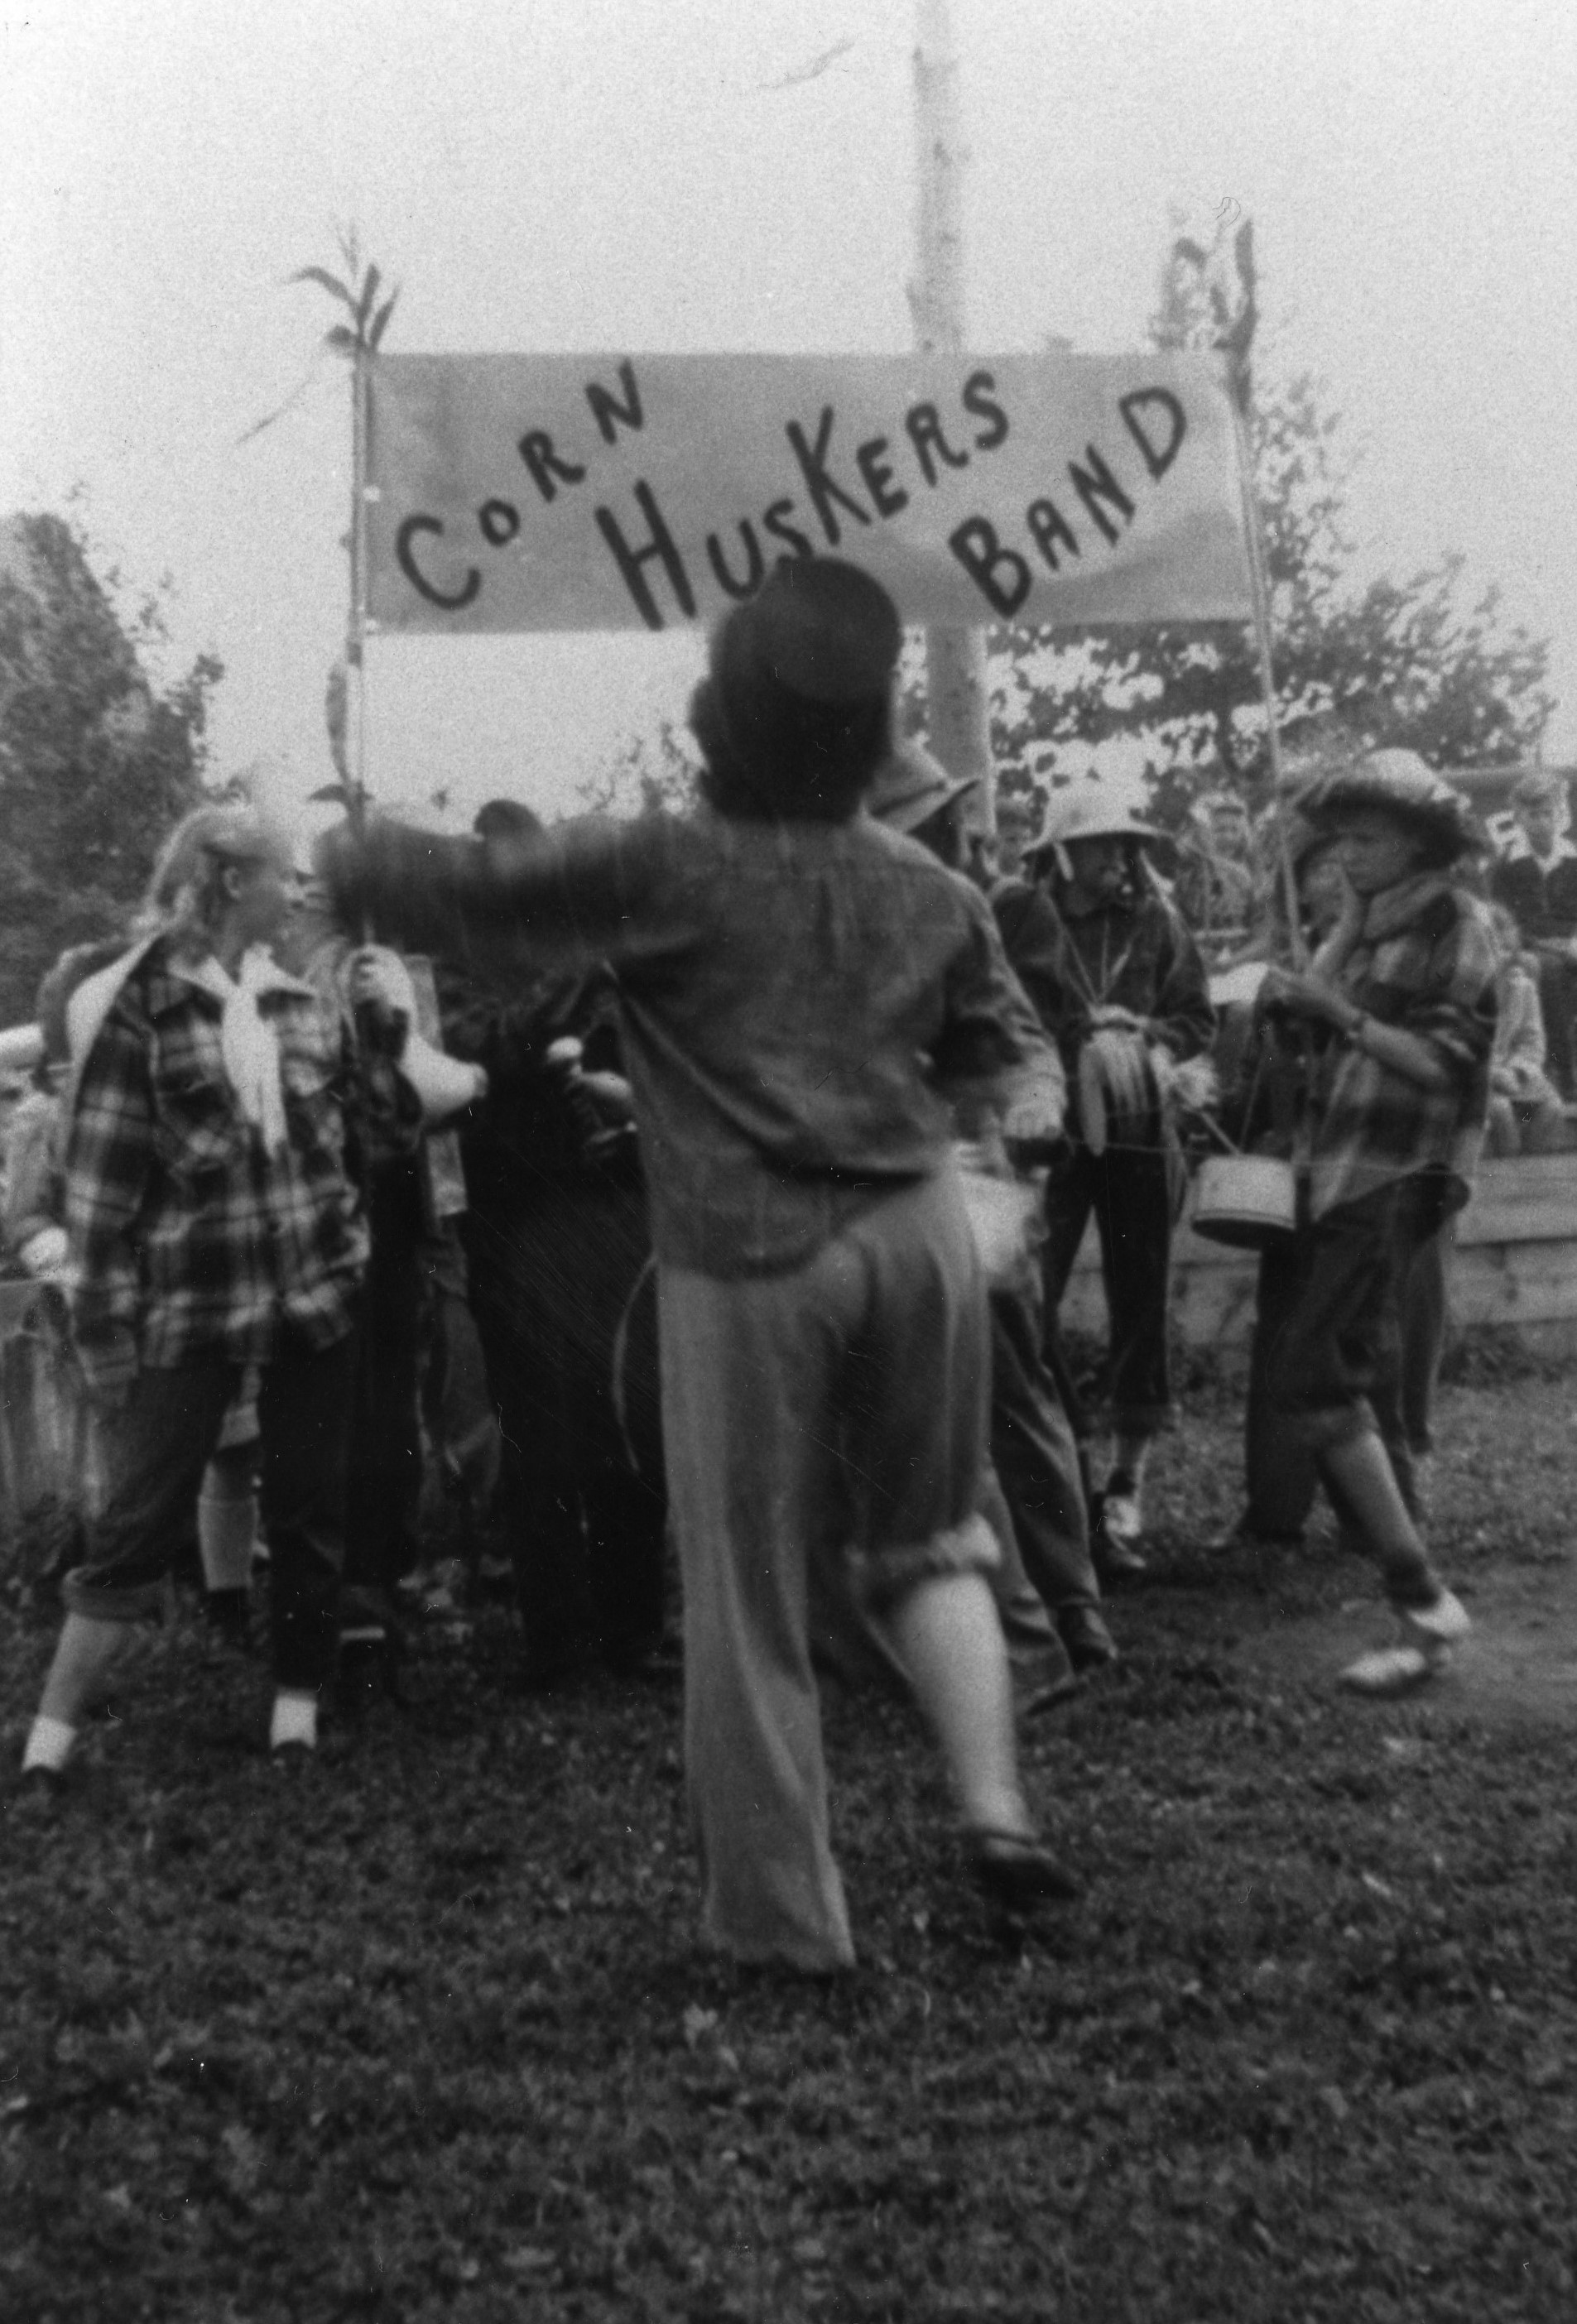 Black and white photograph of a group wearing plaid shirts and straw hats and carrying instruments. They are holding a sign "Corn Huskers Band."